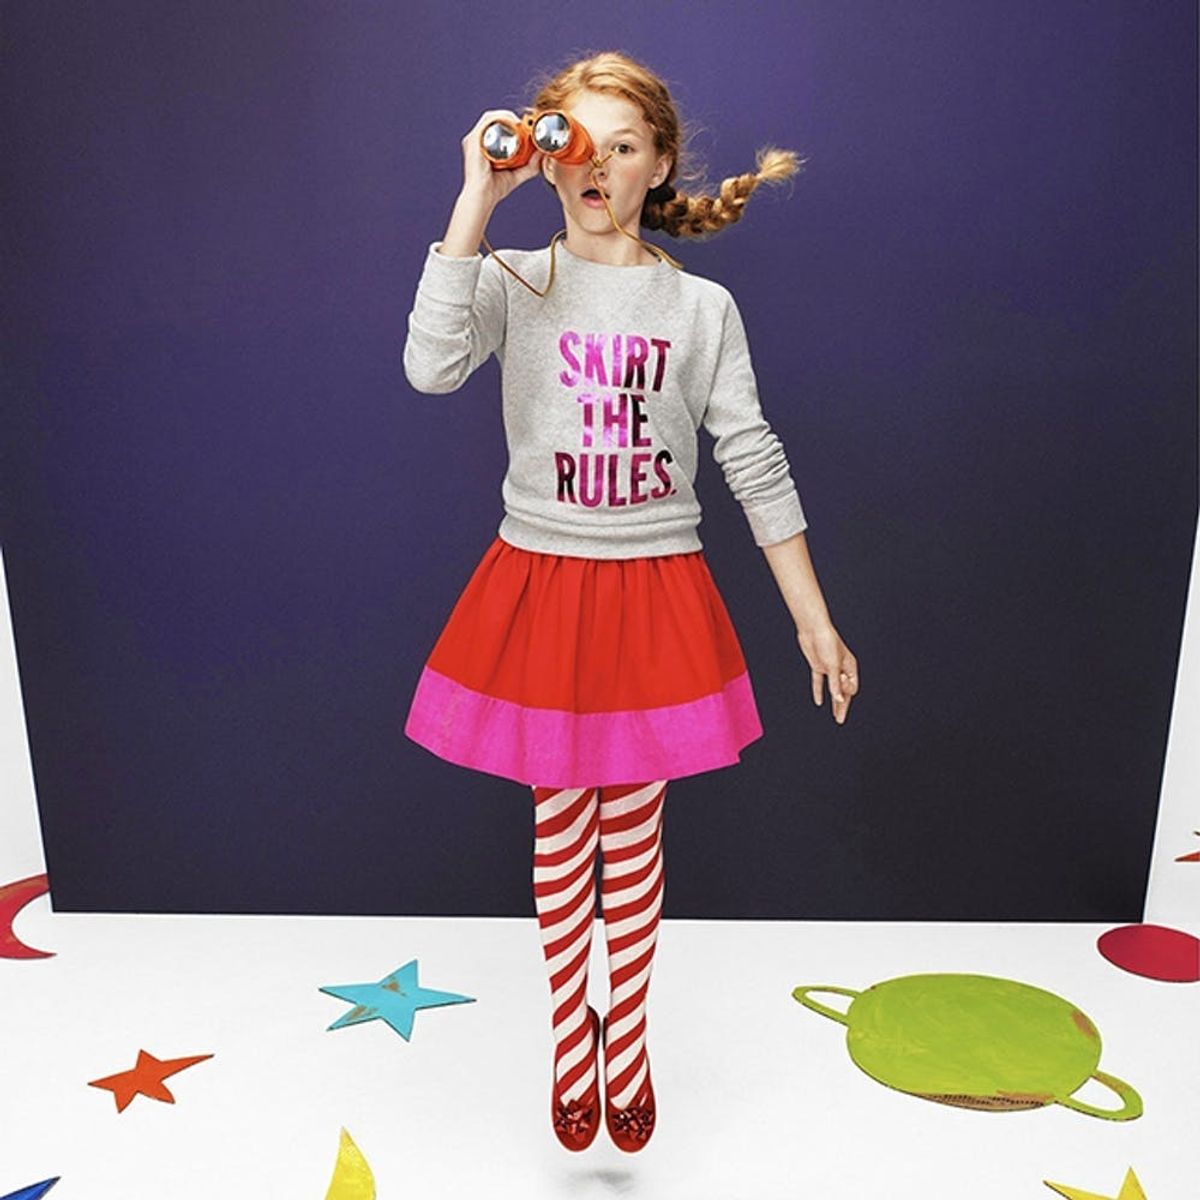 Kate Spade Wants to Take Over Your Kids’ Closet With Her New Line